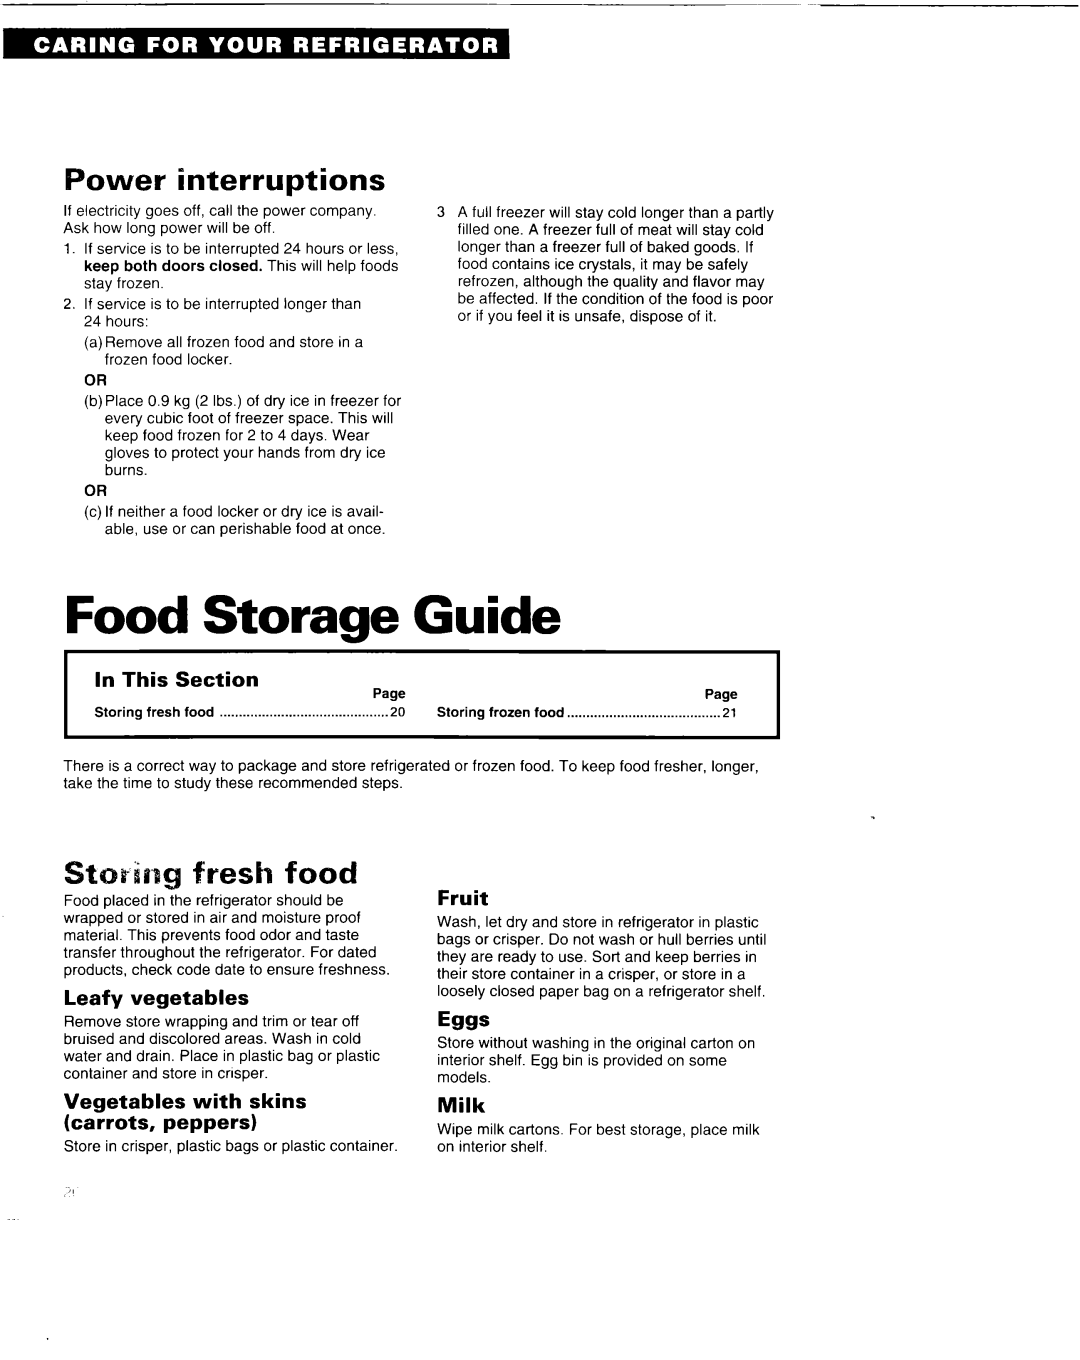 Whirlpool 6ED22DQ Guide, Power interruptions, Leafy vegetables, Fruit, skins, Milk, carrots, peppers, Storage, Food, with 